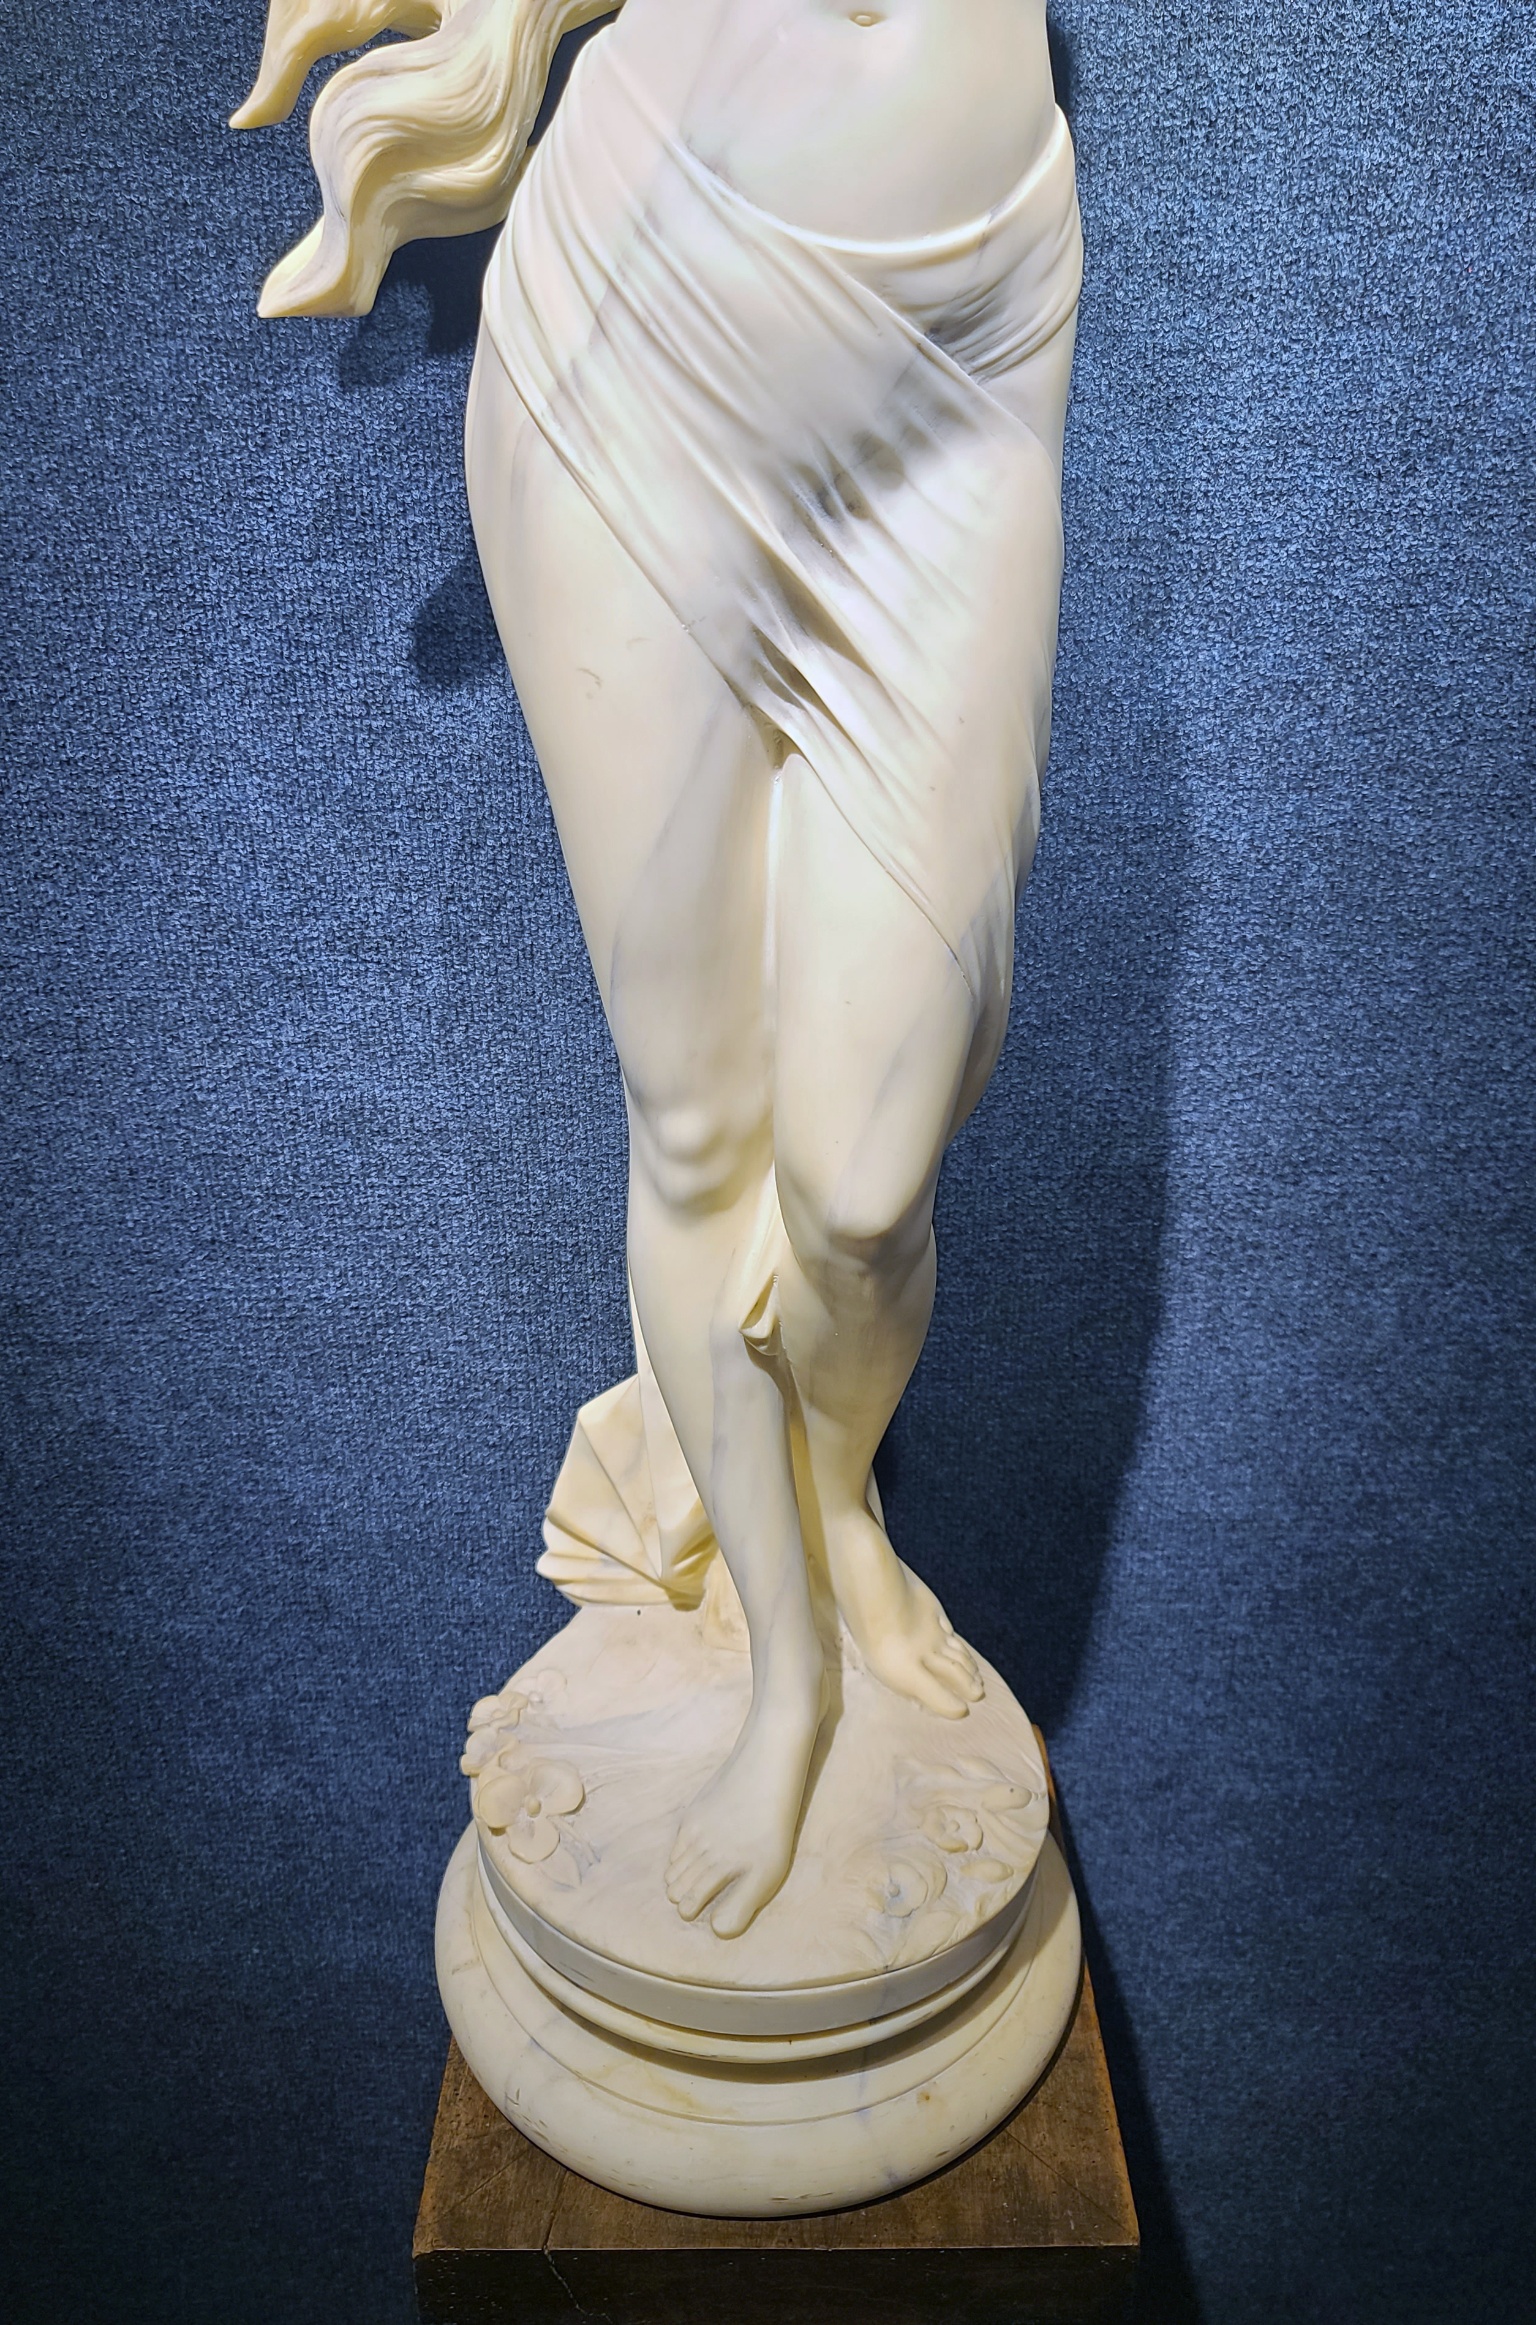 Large 20th C. Female Nude Sculpture - Image 3 of 7